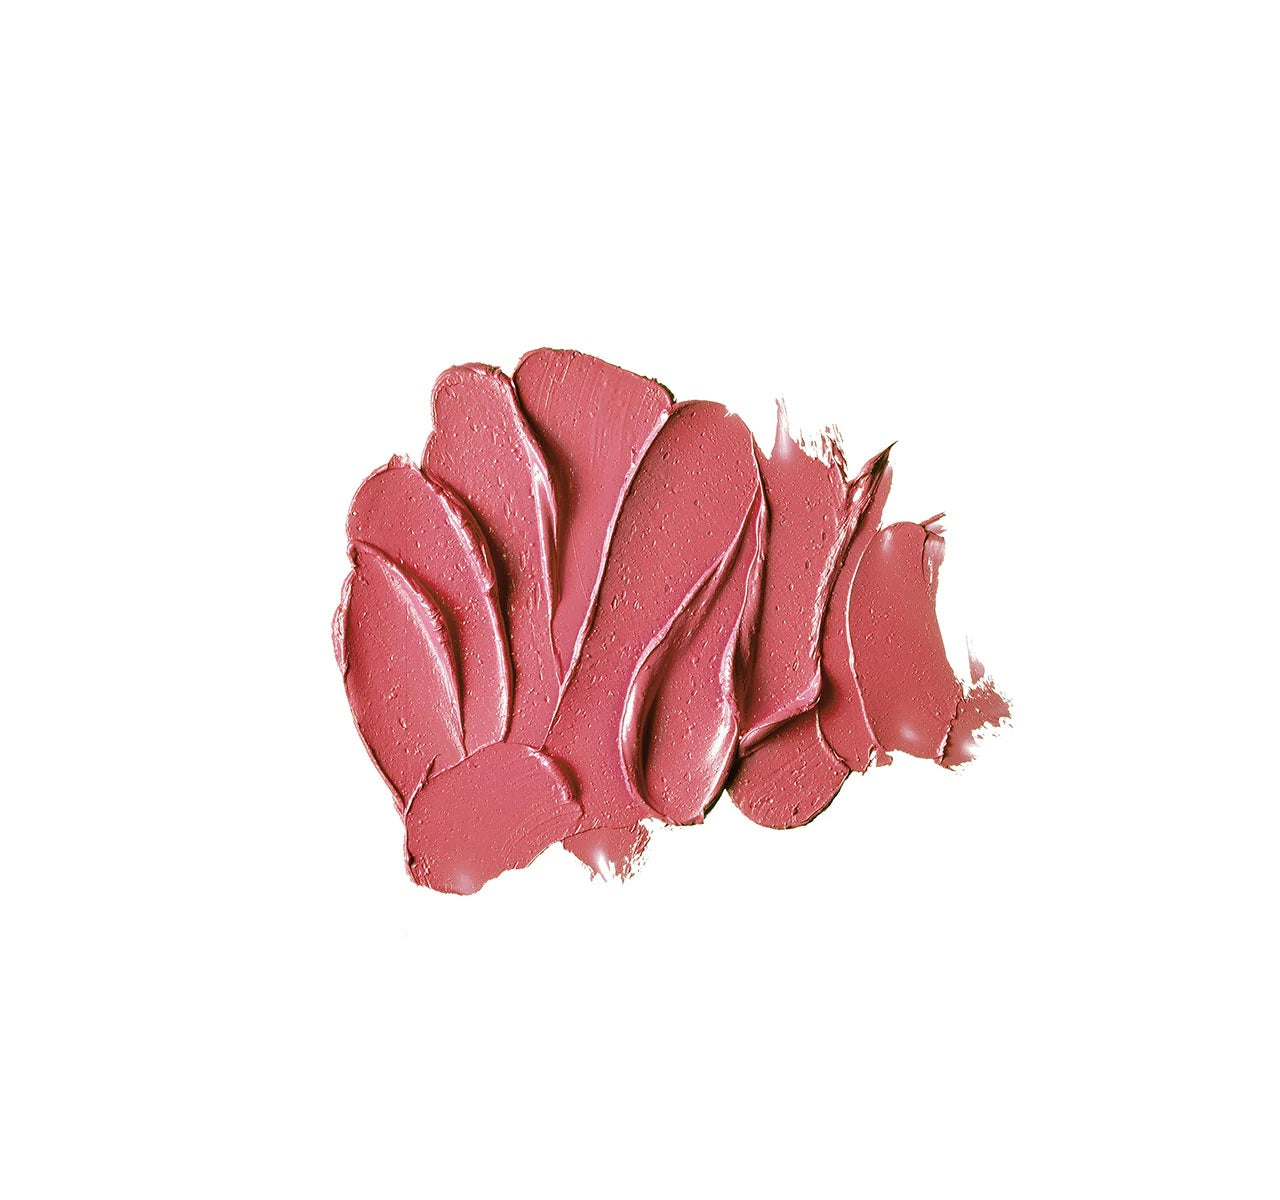 MAC Cosmetics Matte Lipstick Please Me (Muted-Rosy-Tinted Pink)